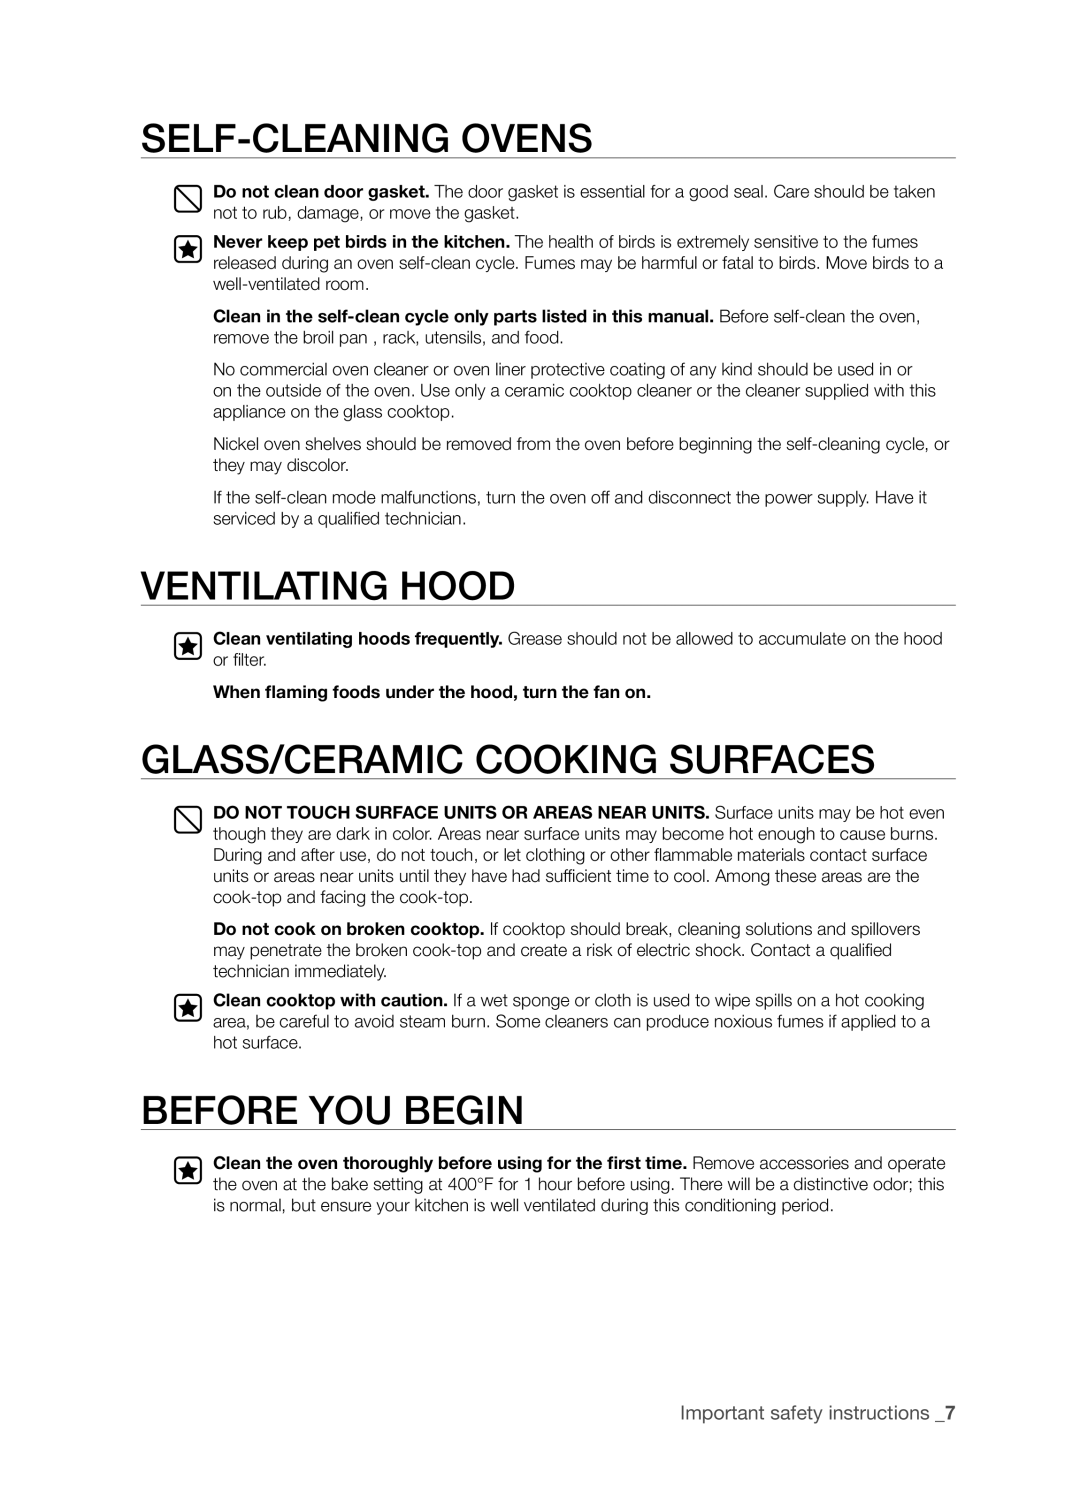 Samsung FTQ352IWX user manual Self-Cleaningovens, Ventilating Hood, Glass/Ceramic Cooking Surfaces, Before you begin 